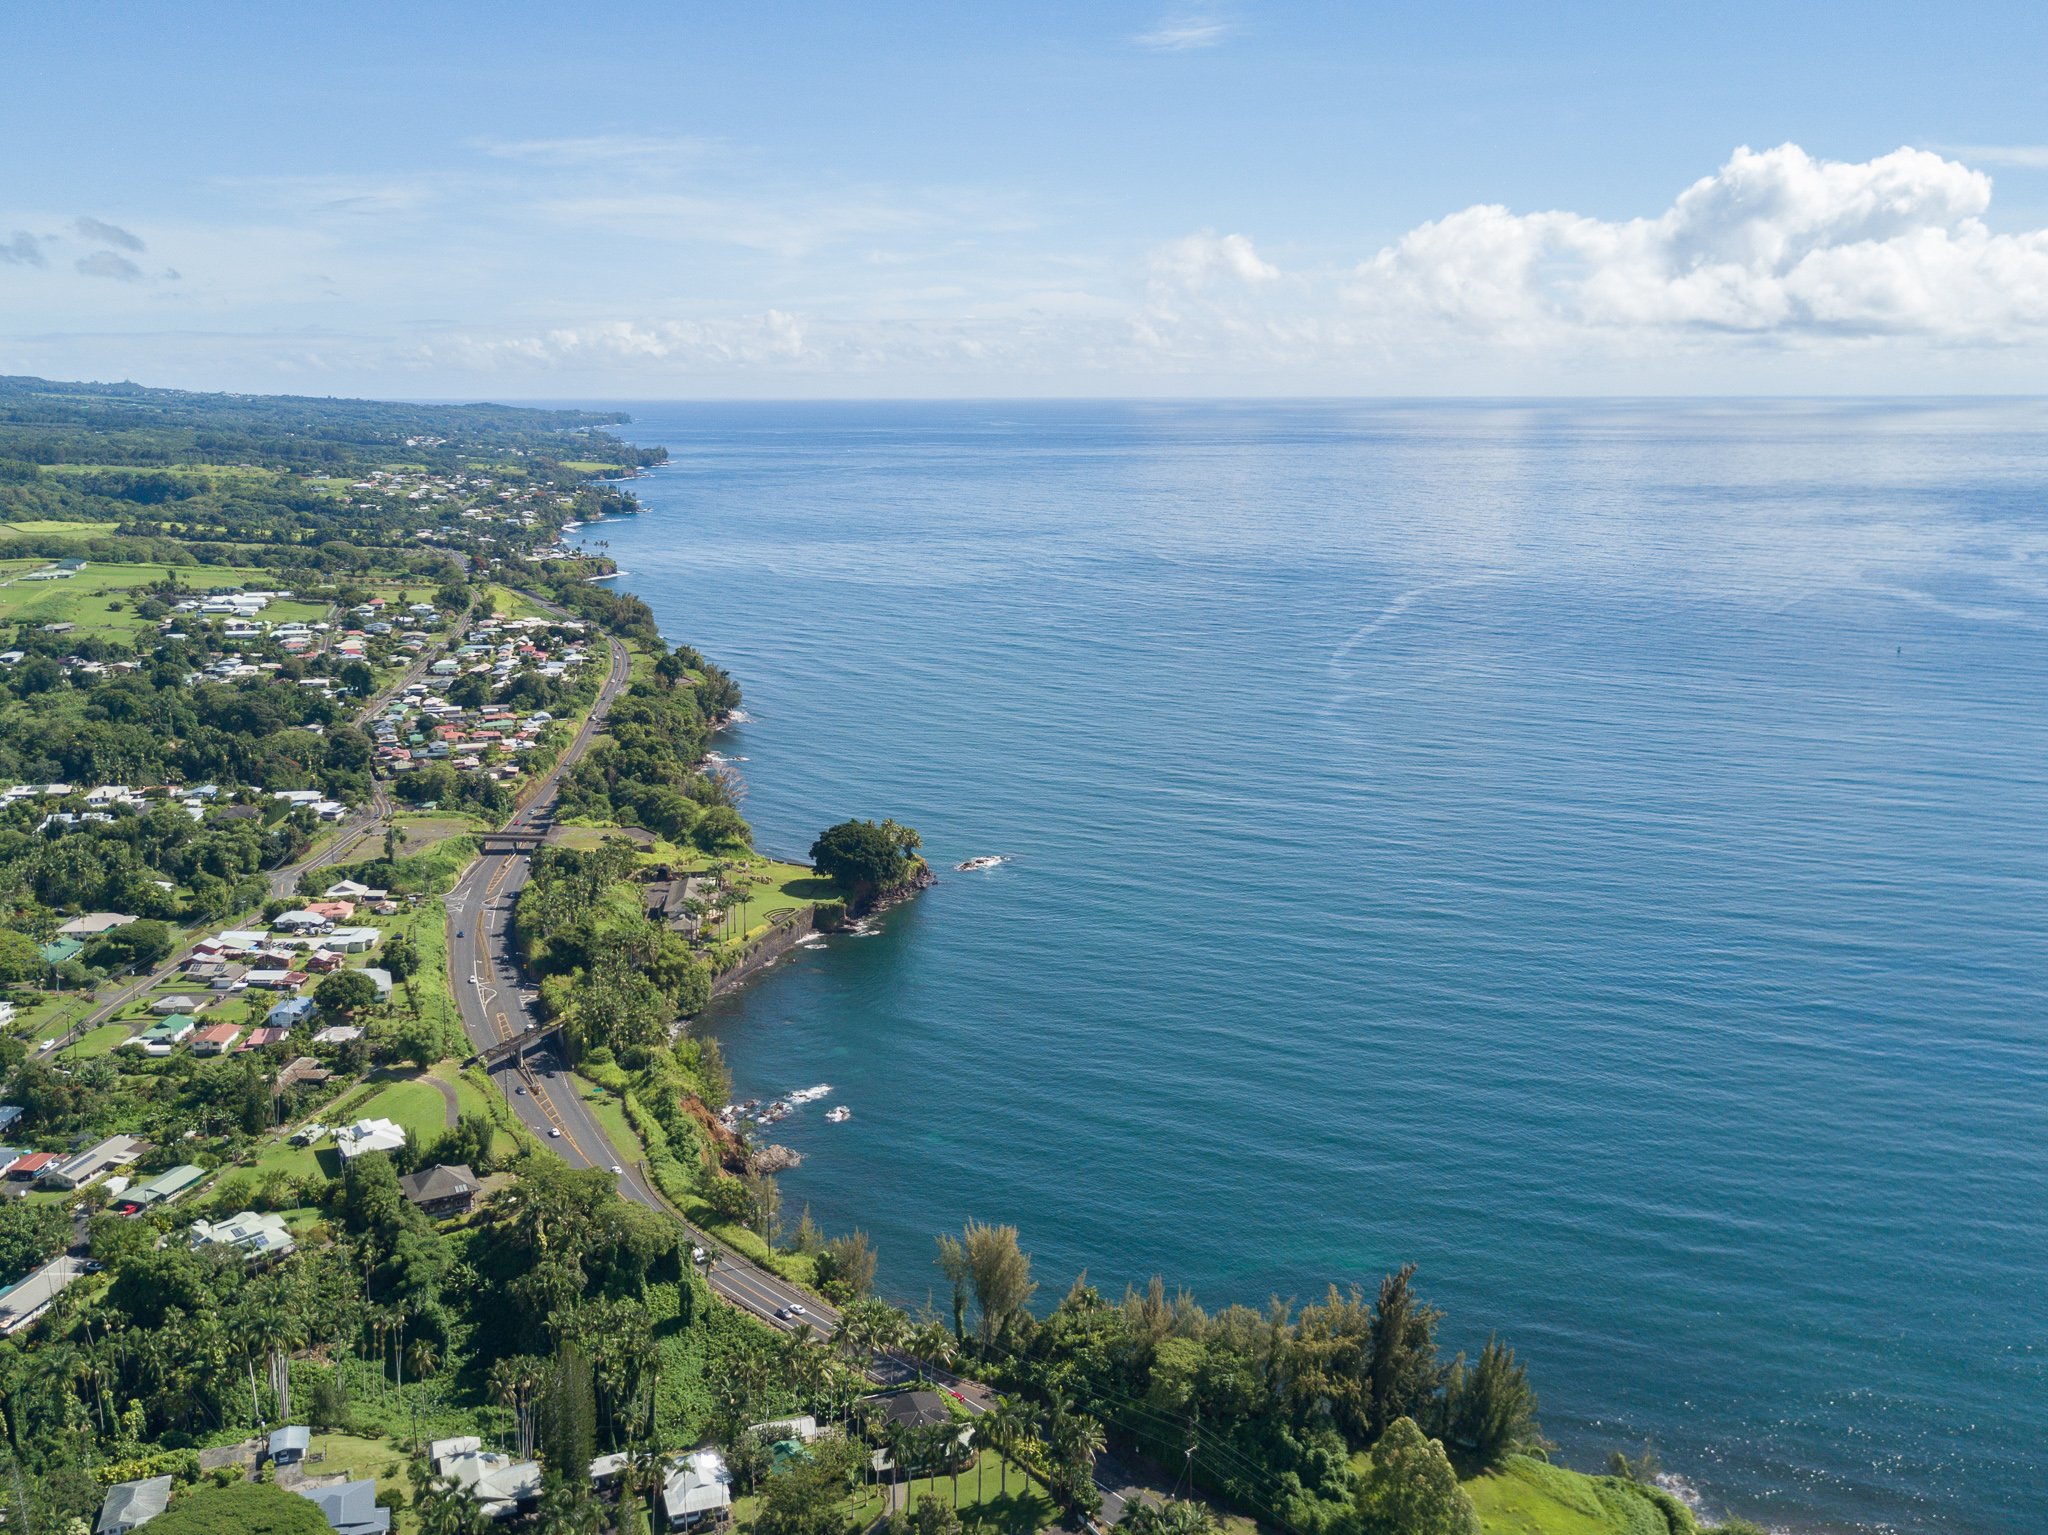 Hilo from the sky